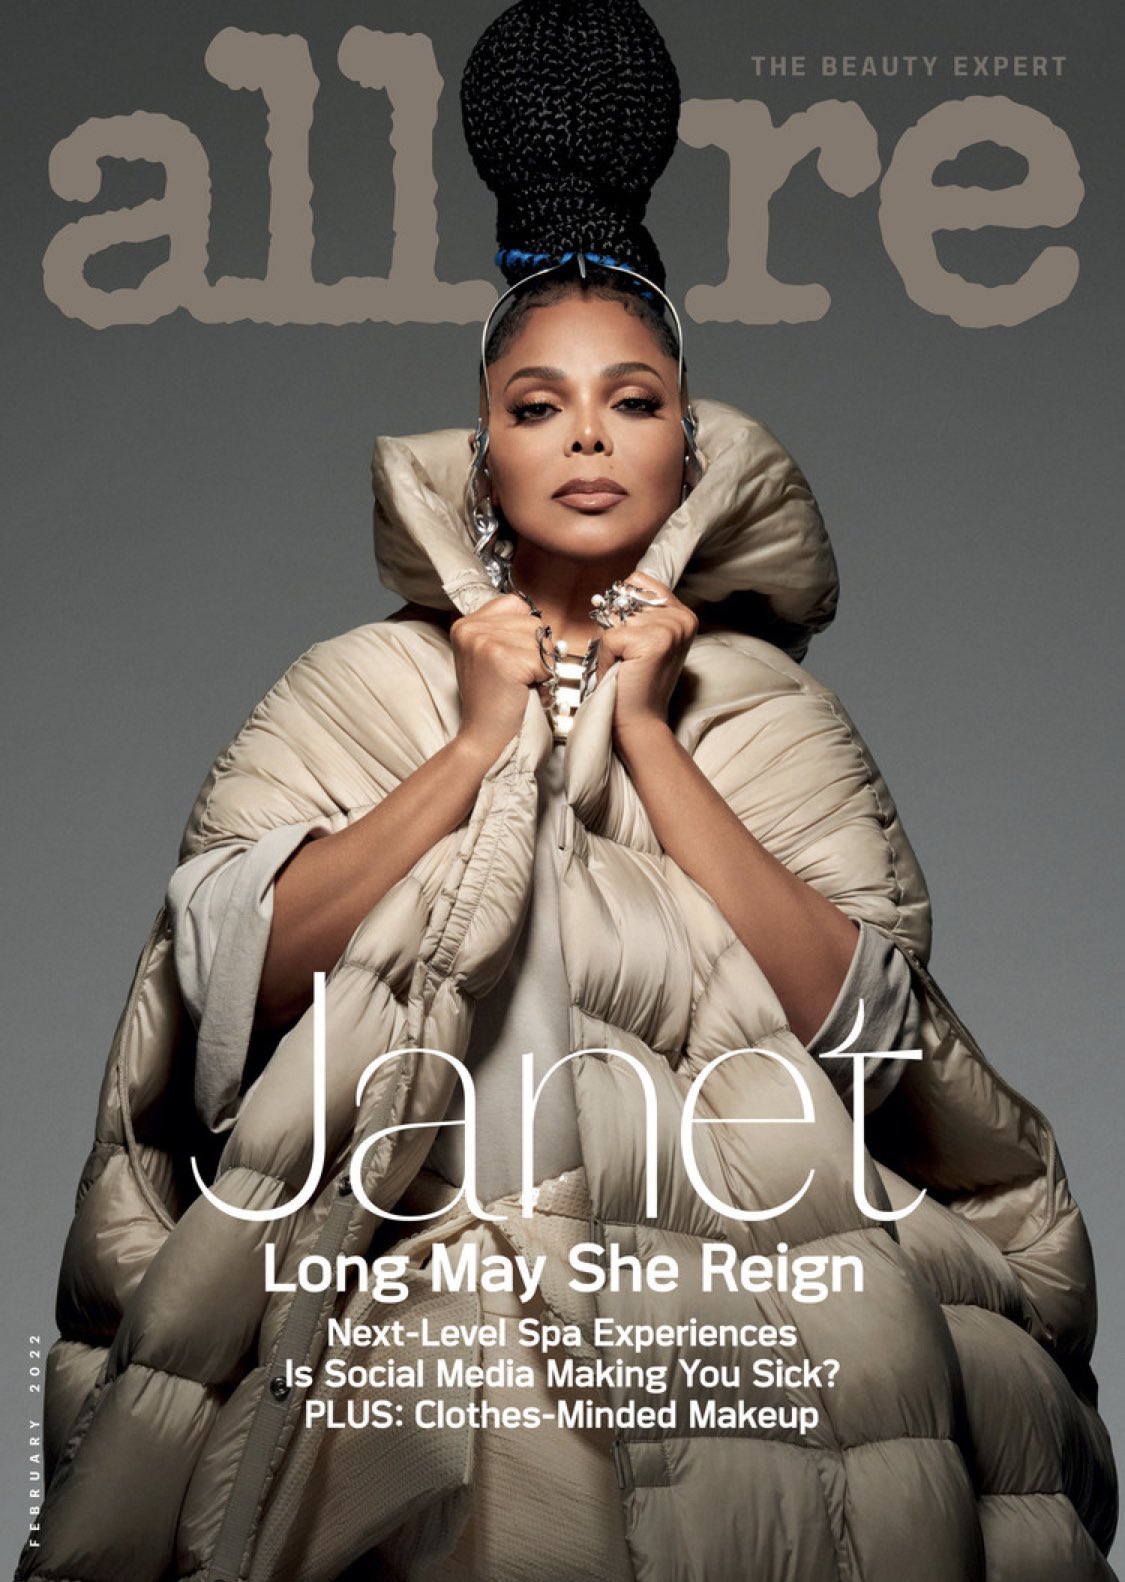 janet-jackson-shares-her-thoughts-on-body-positivity-and-her-evolving-style